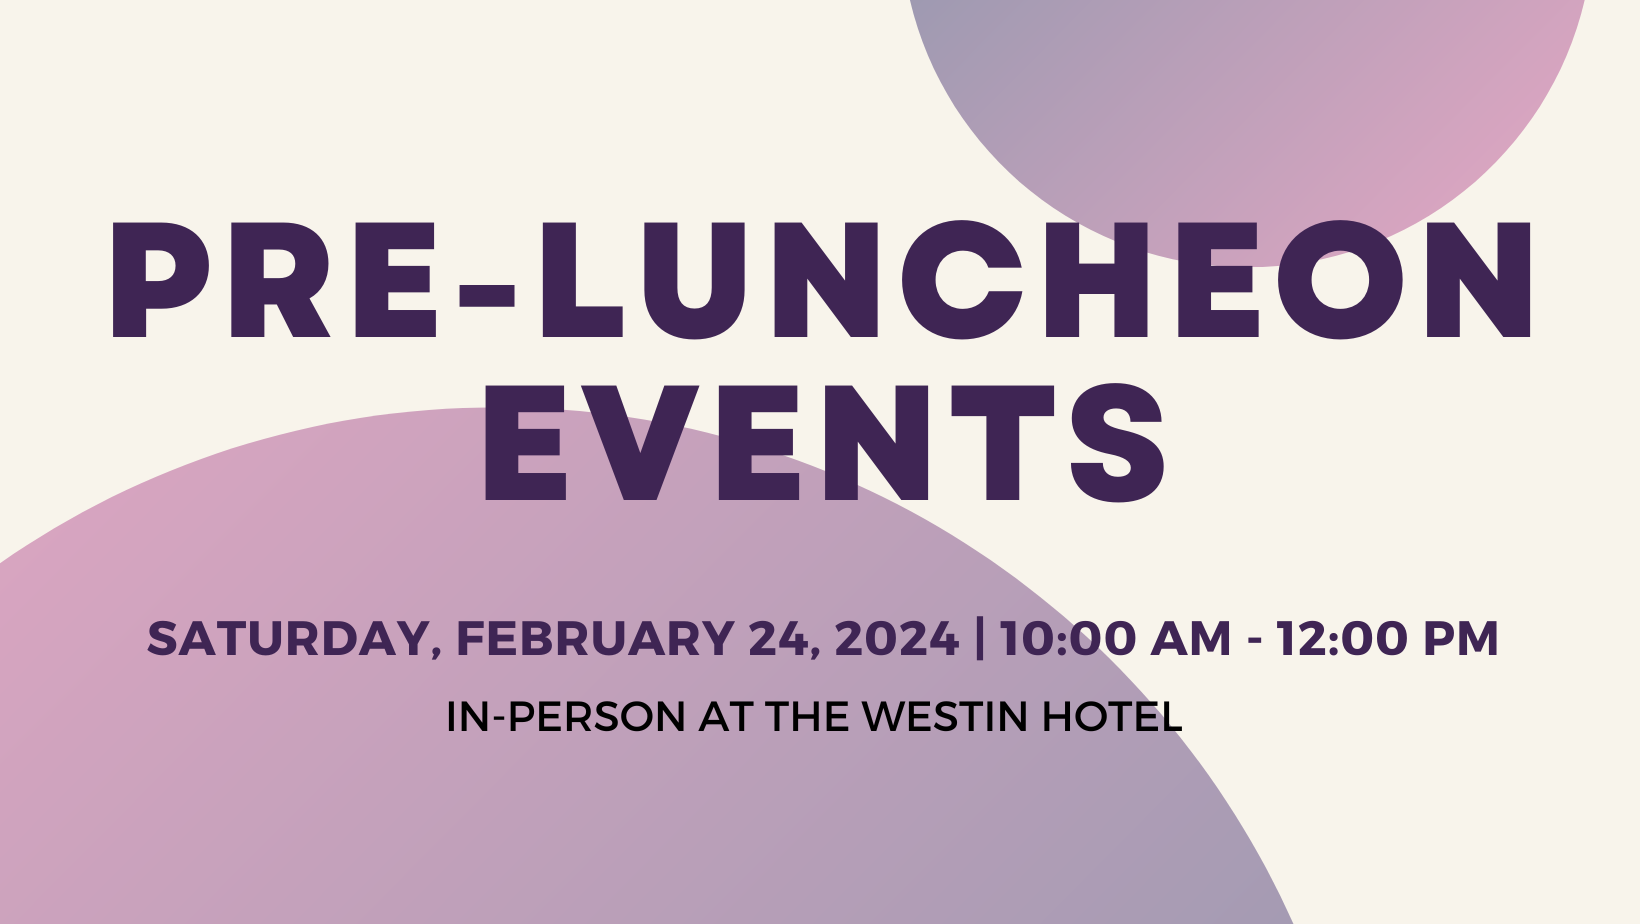 Pre-Luncheon Events. Saturday, February 24, 2024 | 10:00 am - 12:00 pm. In-person at the Westin Hotel